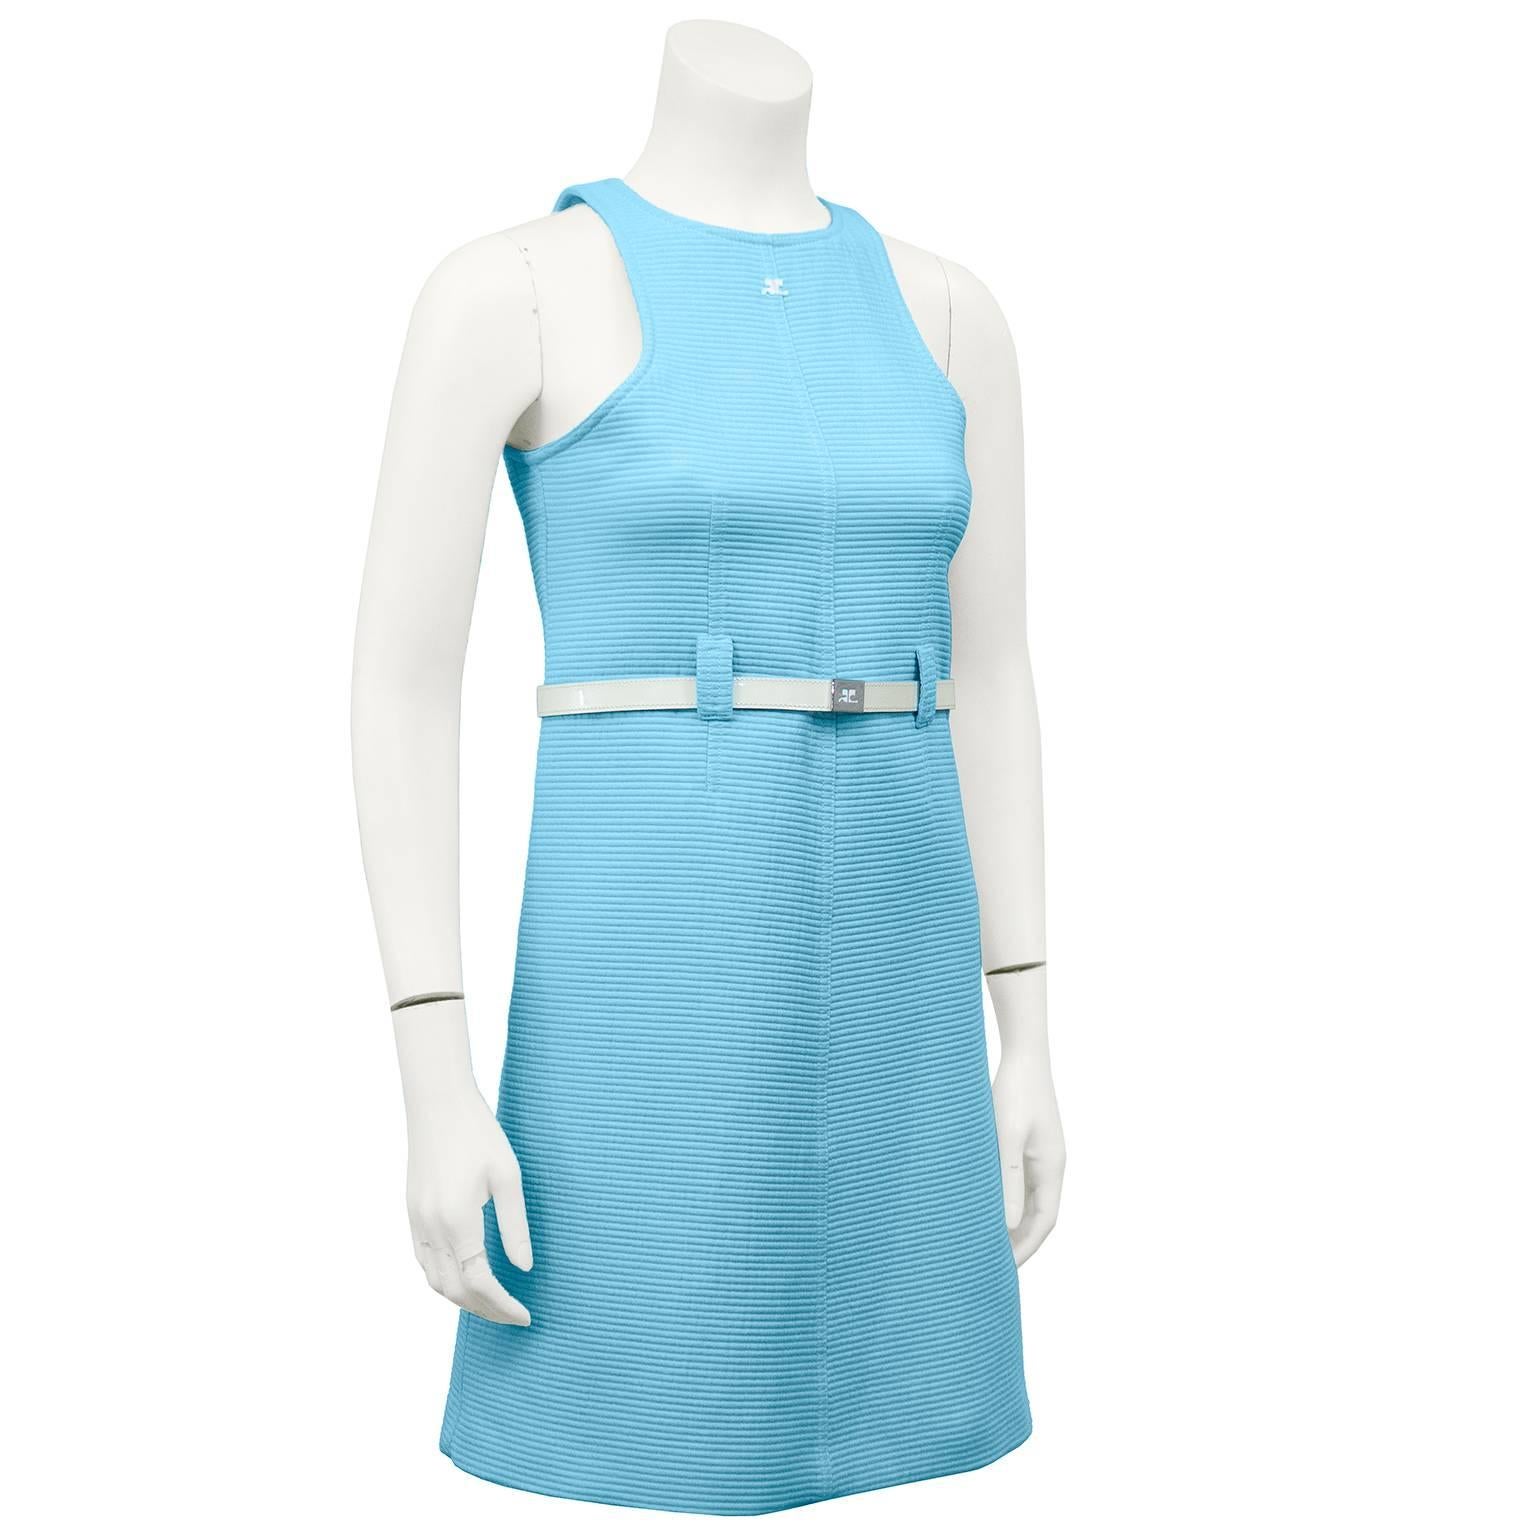 Adorable 1960s Courreges cotton baby blue ribbed day dress. Razor neckline with white embroidered Courreges logo. Belt loops and white patent loose fit leather belt at waist with sliver hardware and Courreges logo. Excellent vintage condition.